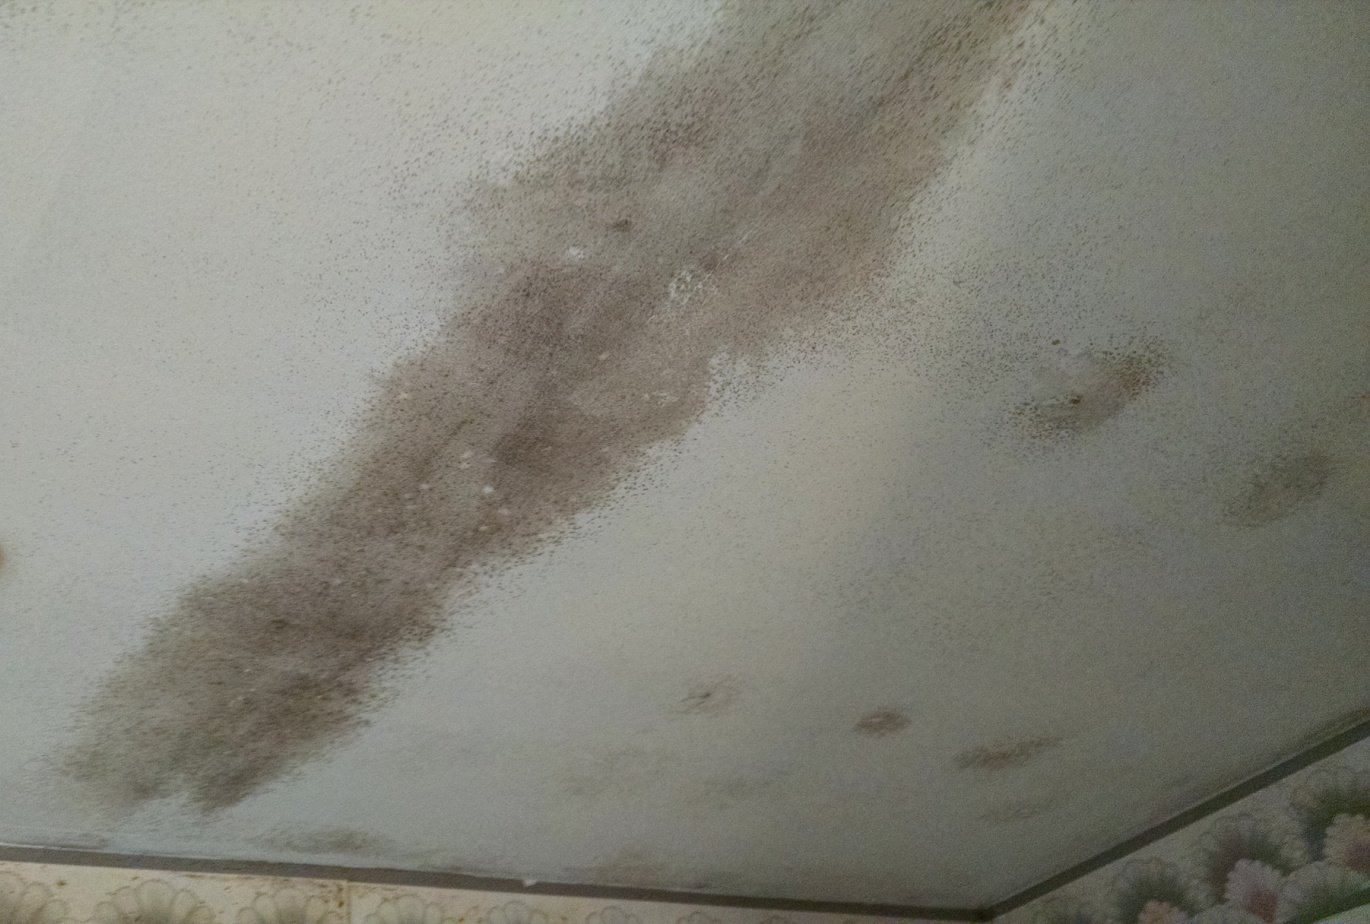 Kitchen ceiling mold